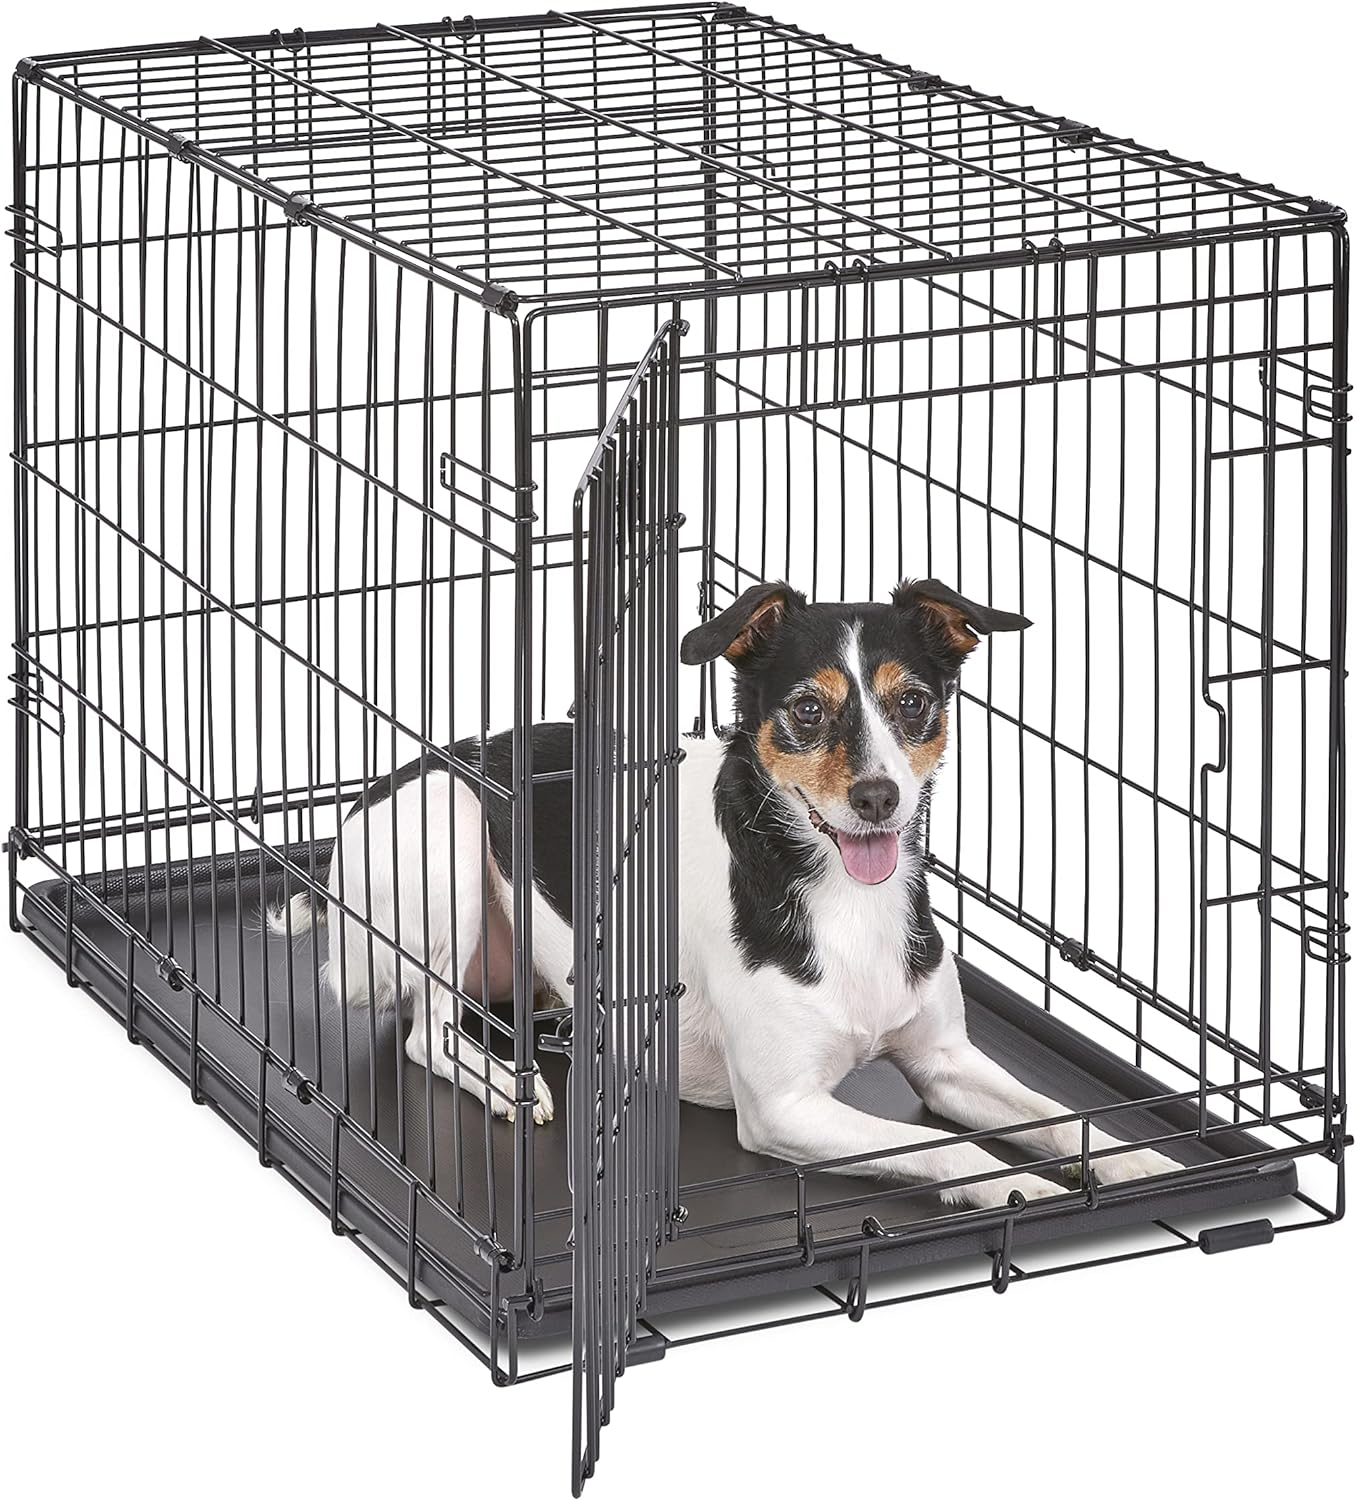 MidWest Homes for Pets Newly Enhanced Single Door iCrate Dog Crate, Includes Leak-Proof Pan, Floor Protecting Feet , Divider Pane l  New Patented Features